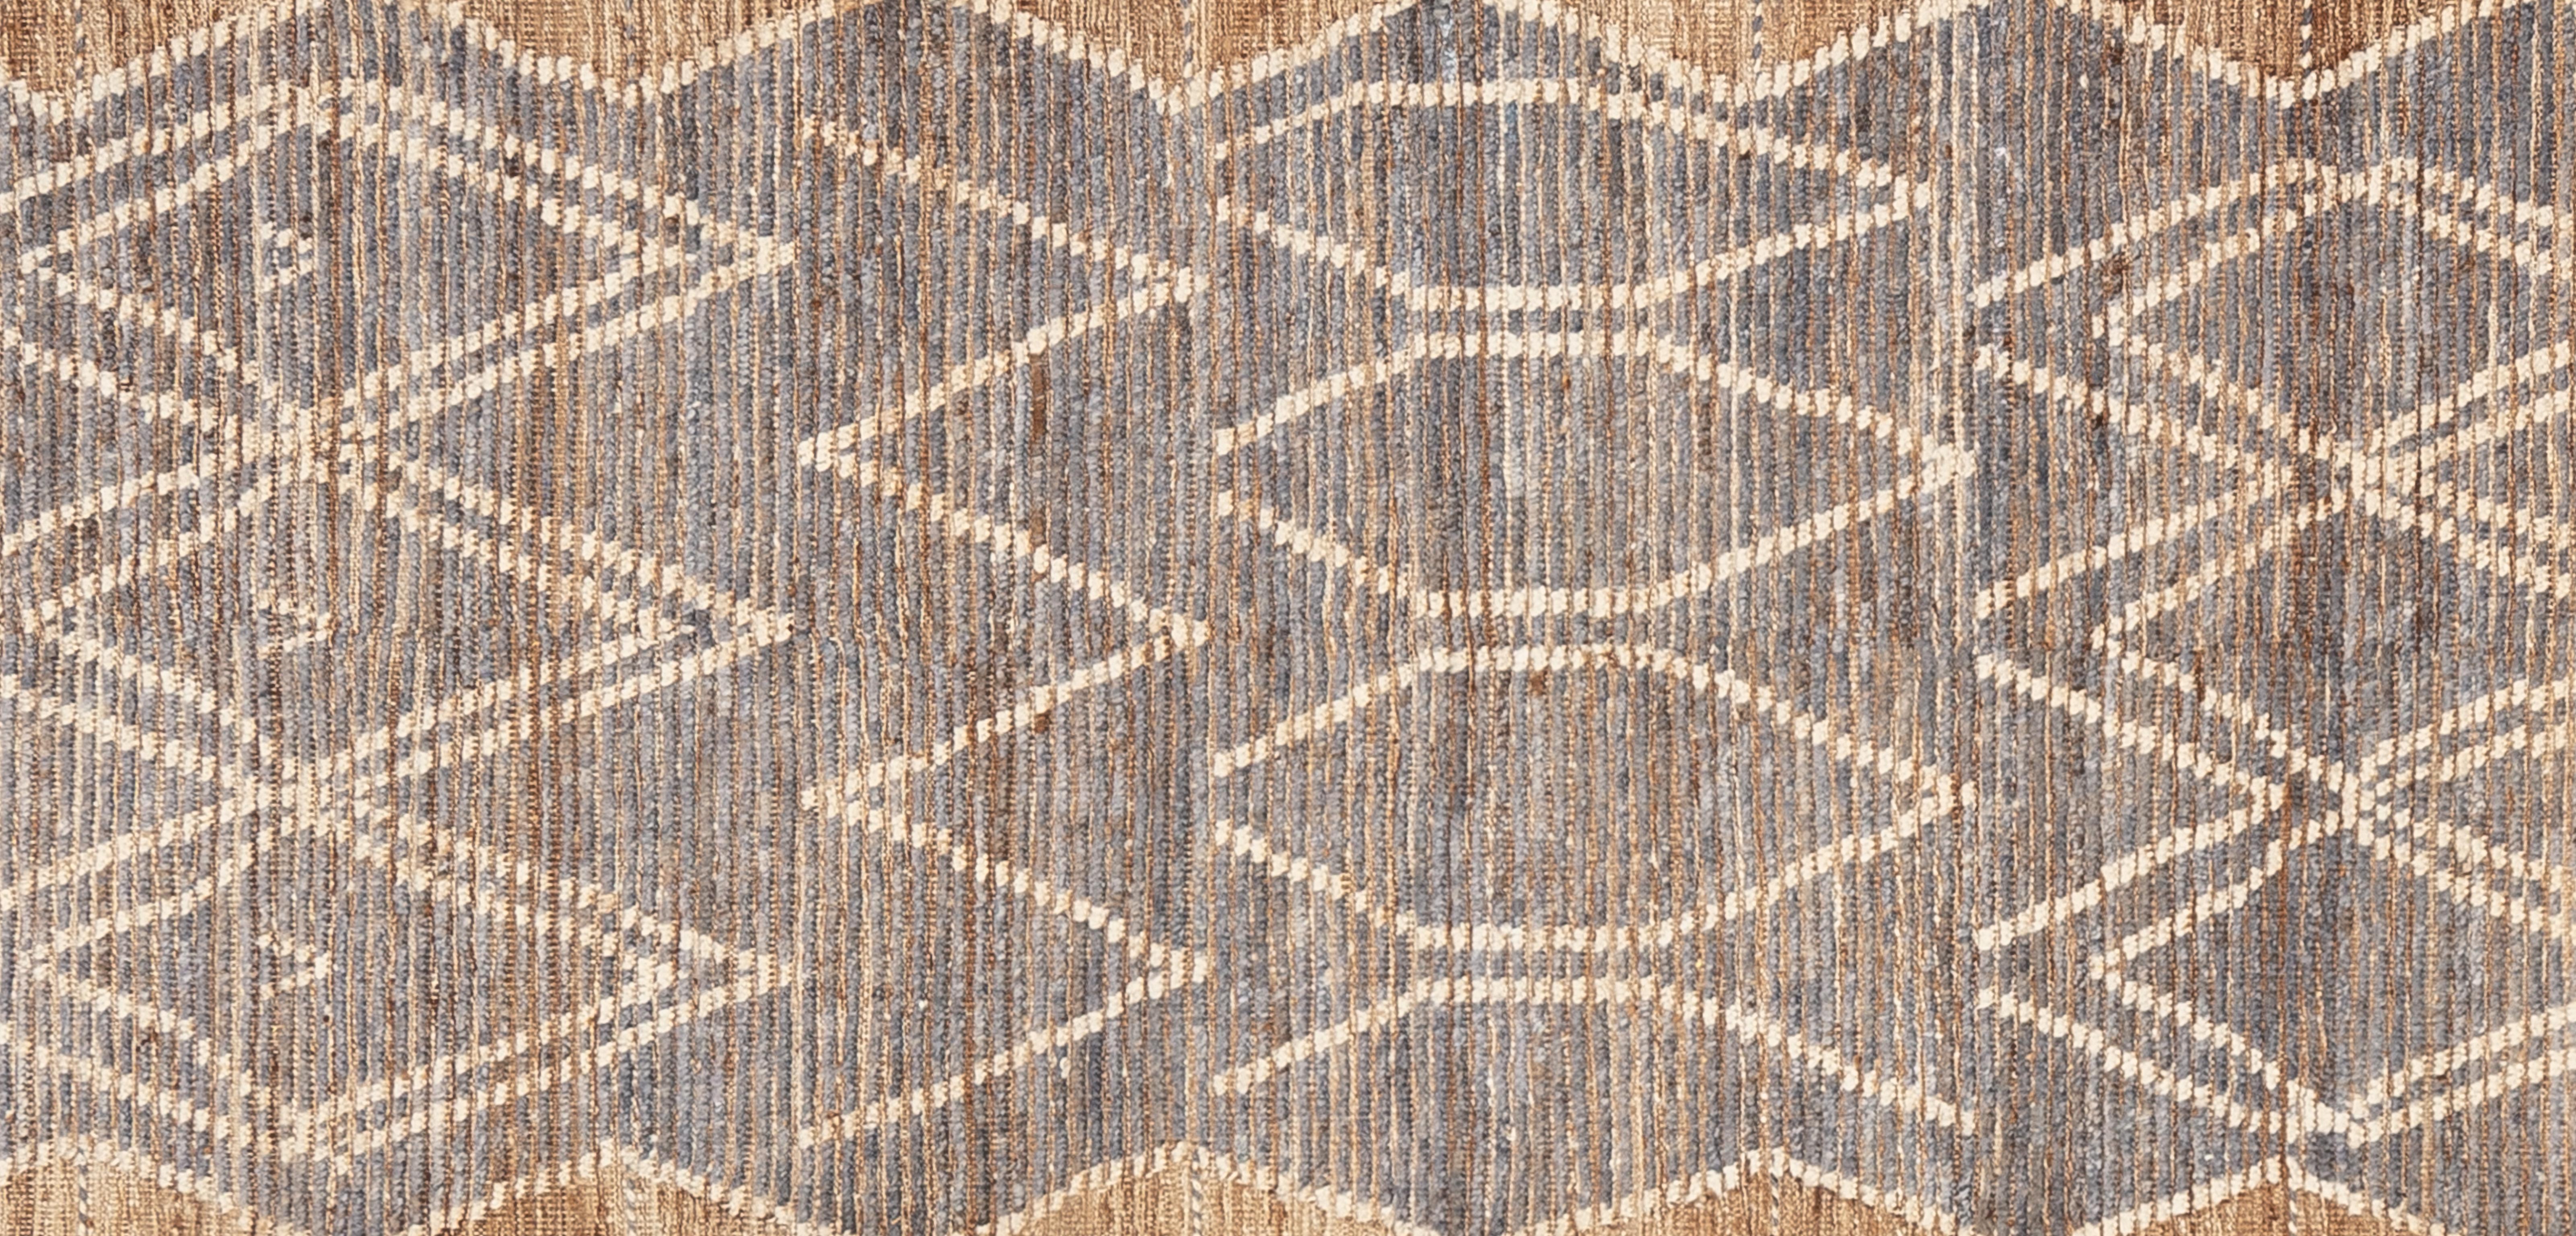 Handwoven with 100% handspun wool, in the subtropical woodlands of Pakistan; this beautiful naturally dyed Moroccan rug is truly one-of-a-kind. Moroccan rugs tend to be simple and are the perfect compliment for your décor. From minimalist modern to